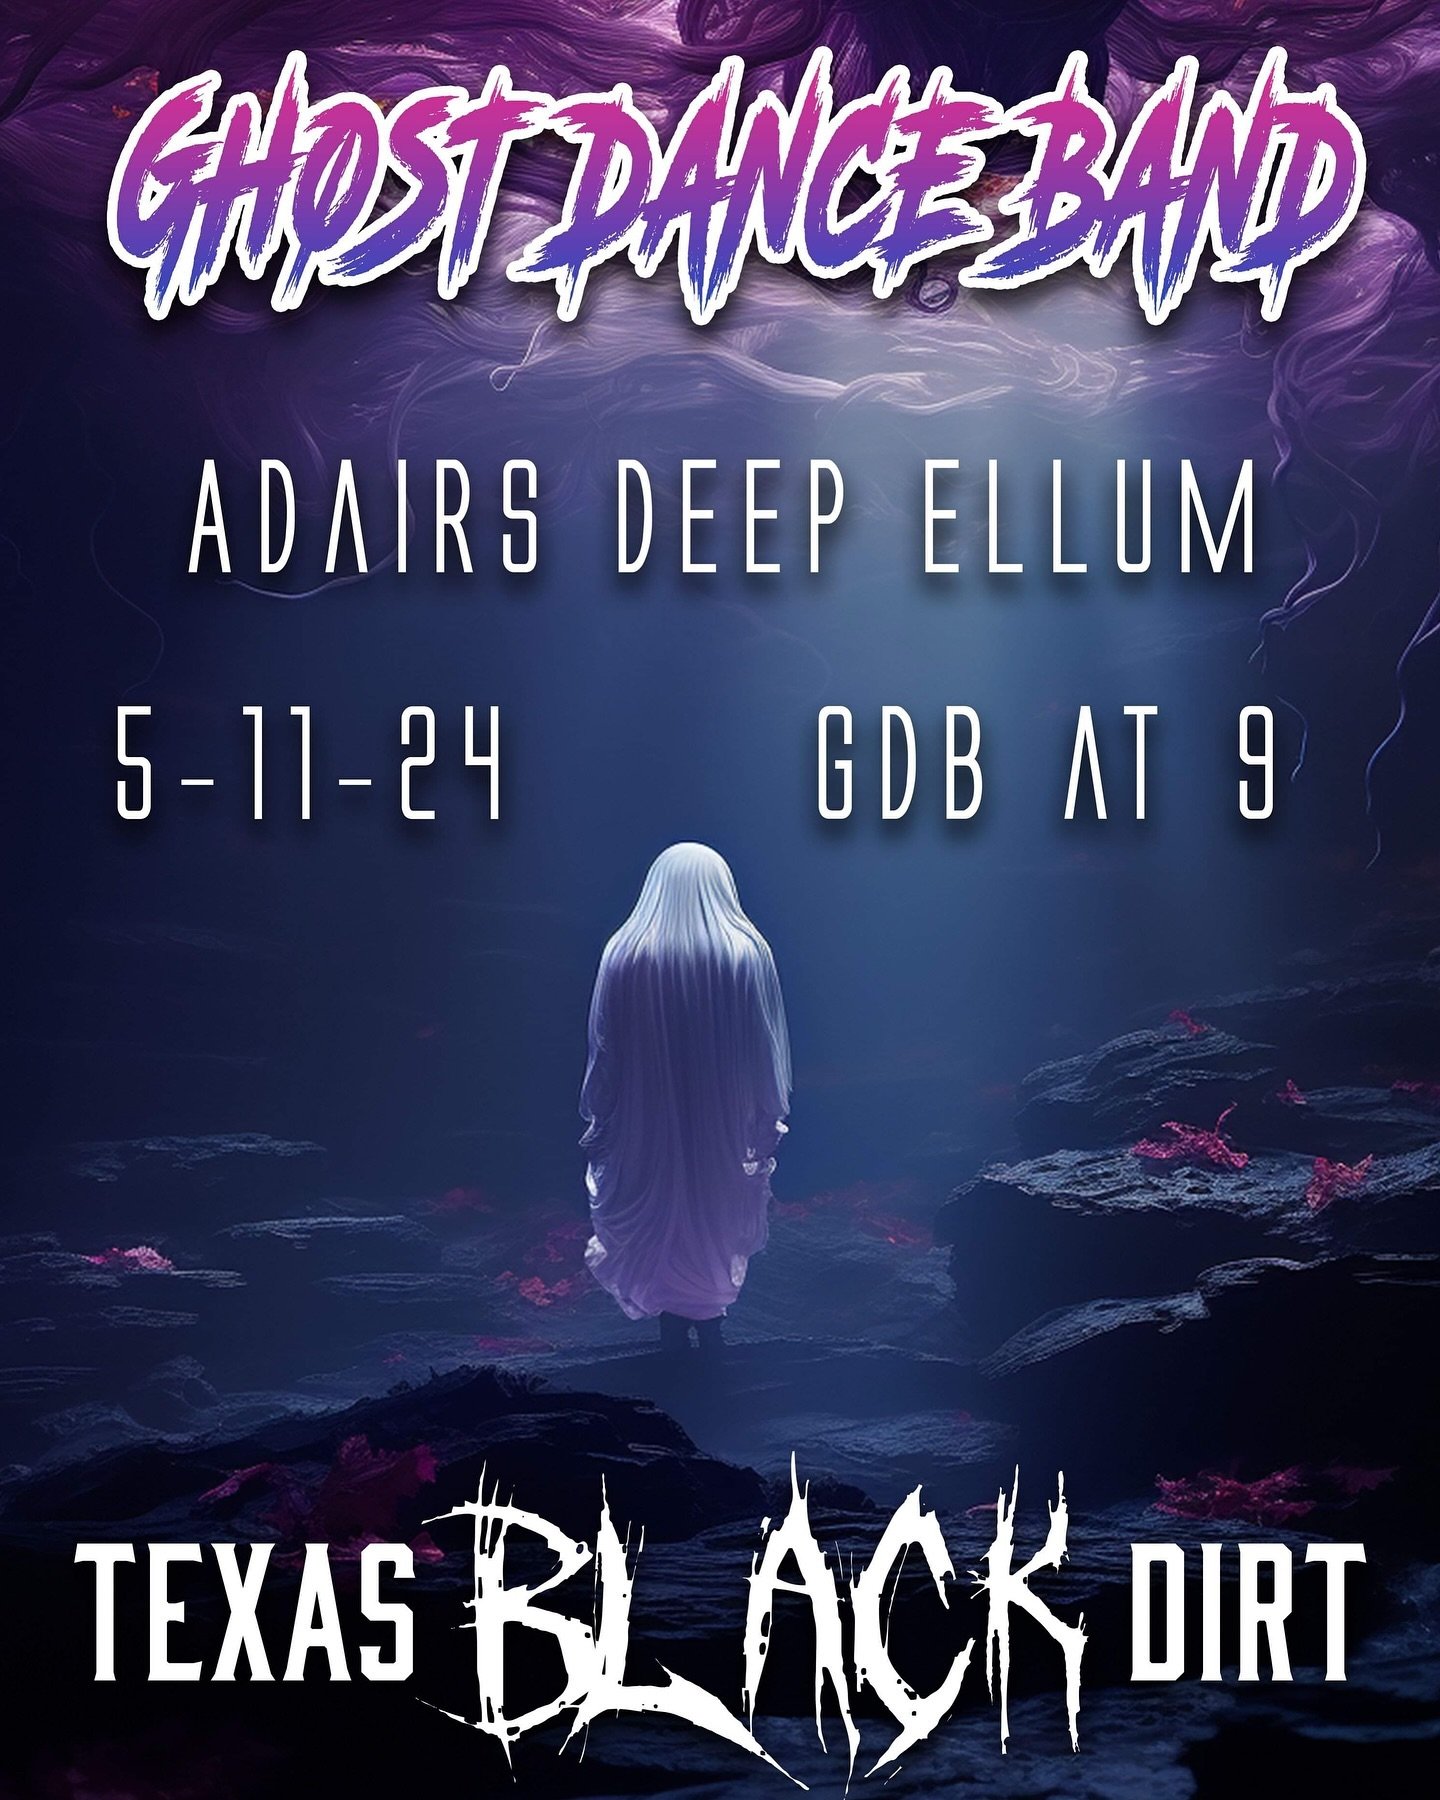 Dallas! Back at Adairs on Saturday. Playing every song we know. Come hang out! Music kicks off at 9!